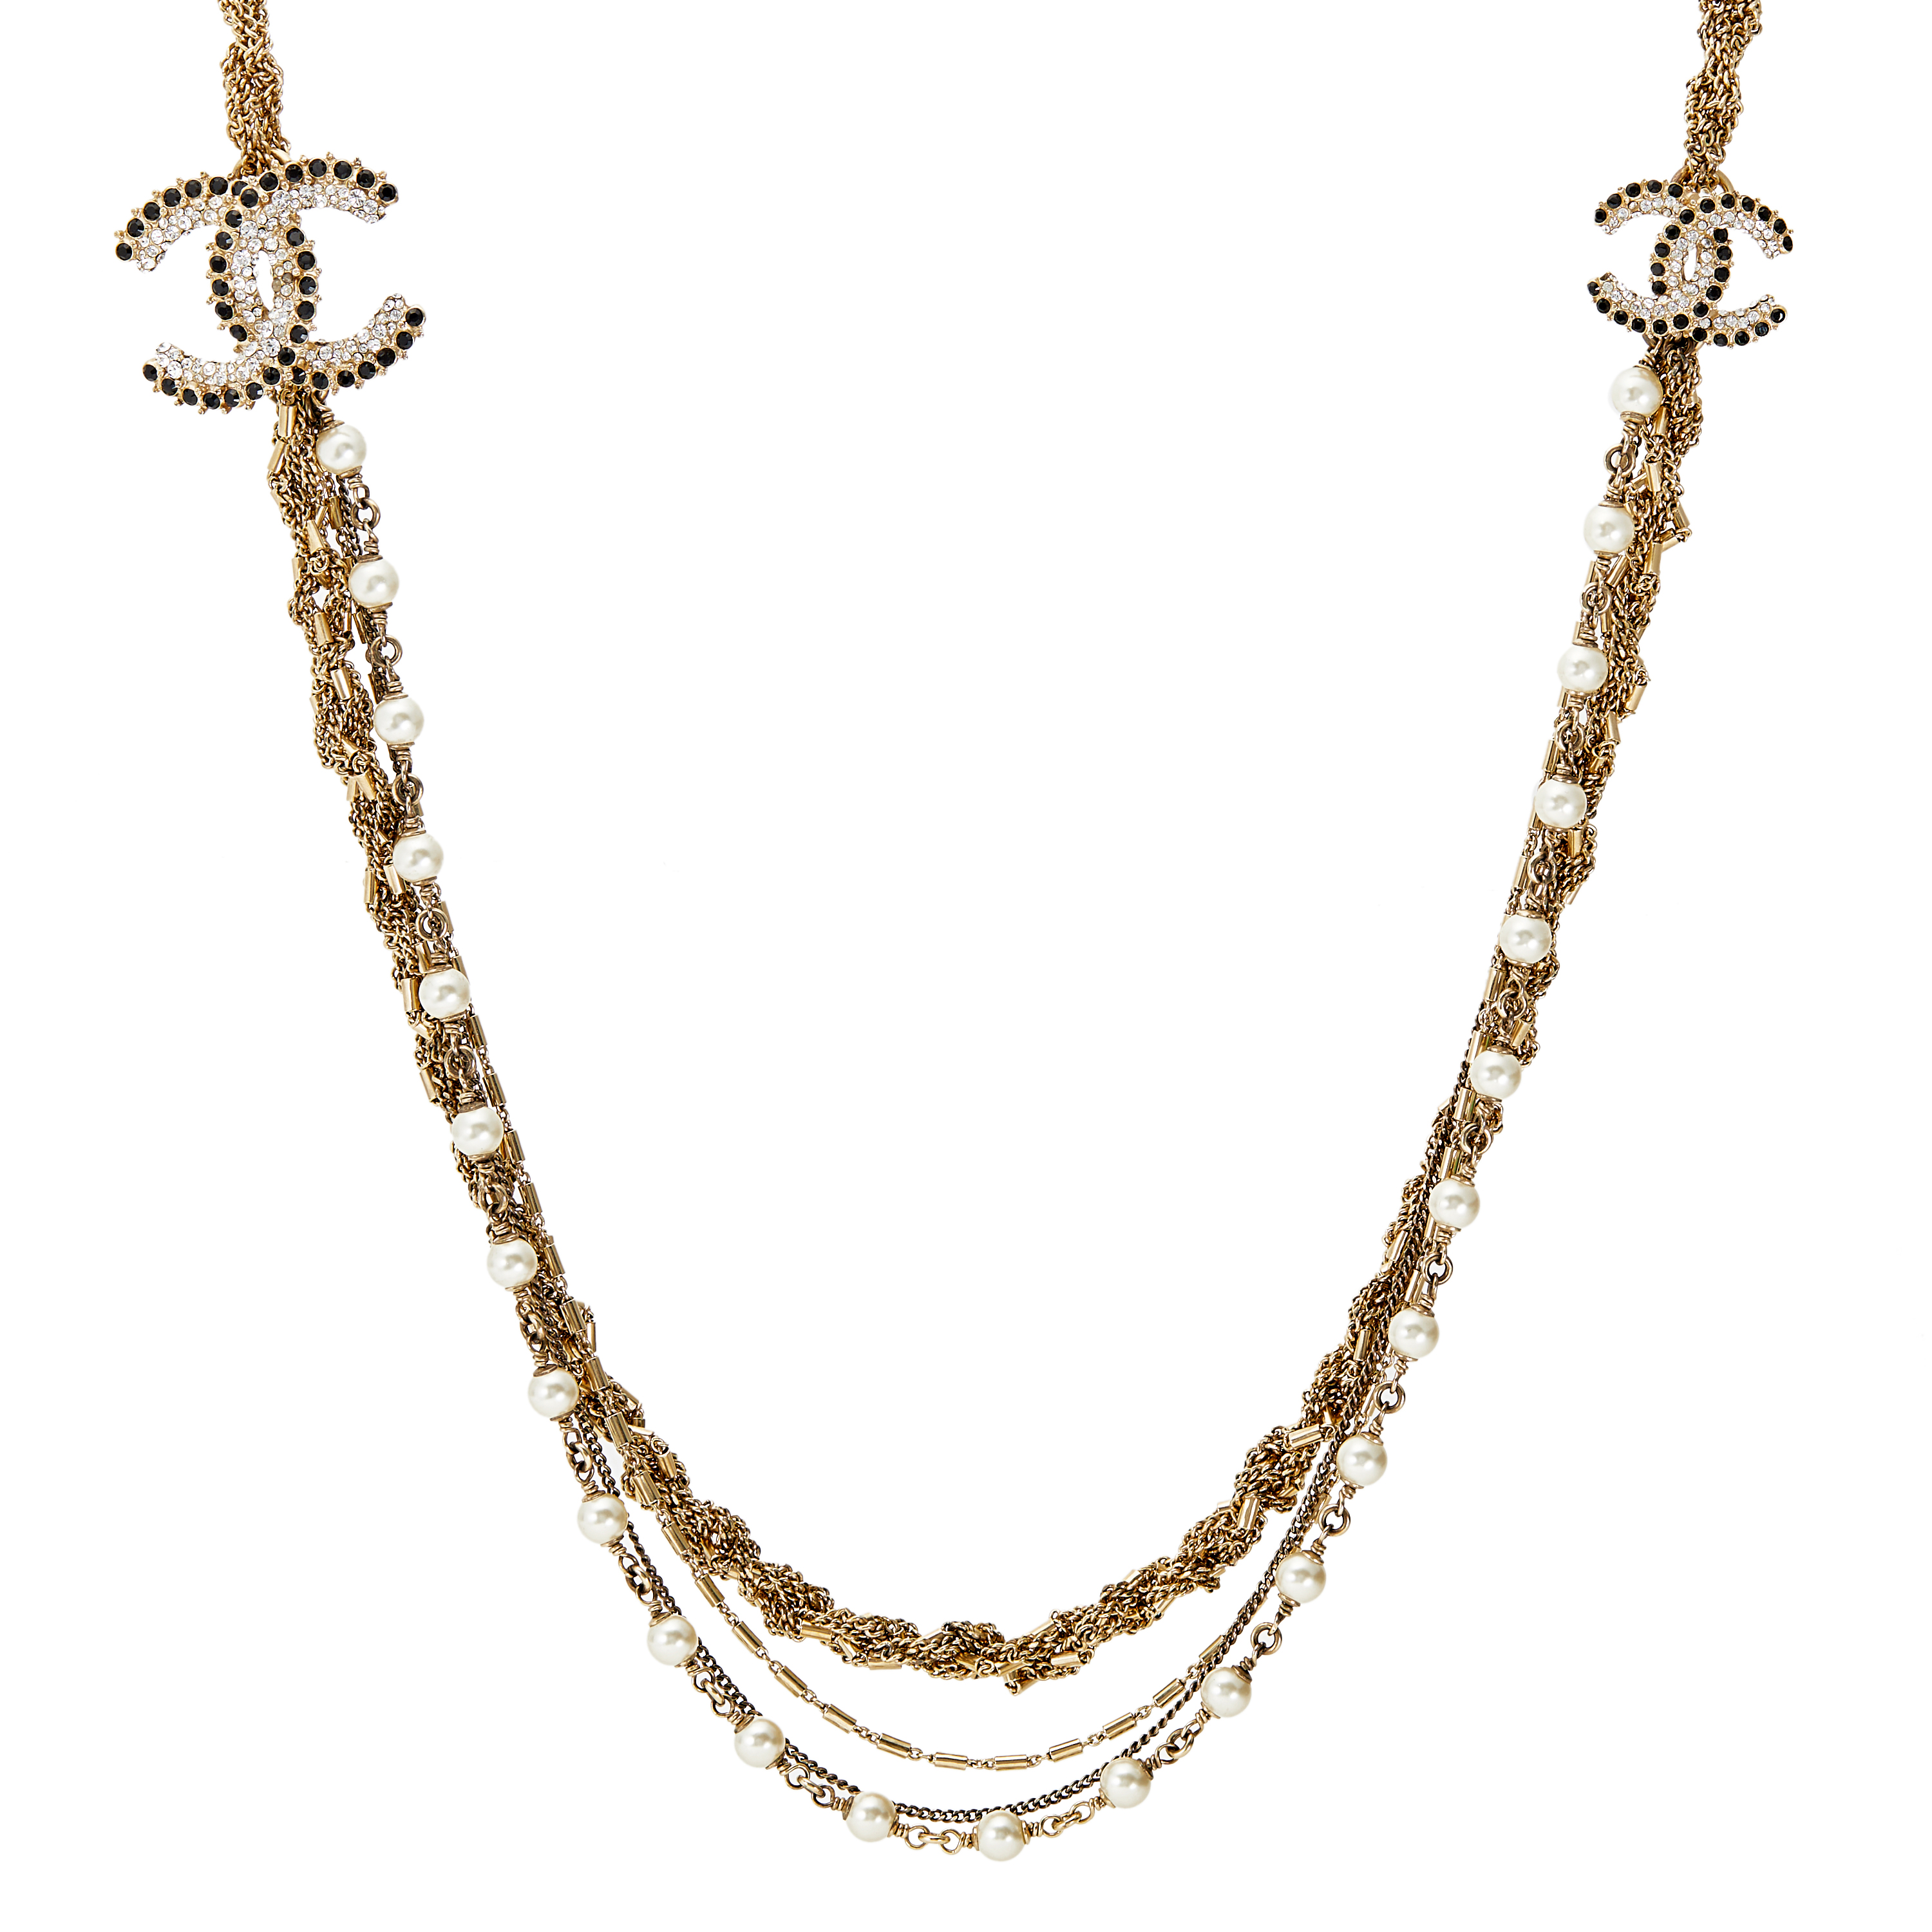 Chanel - a gilt-metal layered imitation pearl chain necklace.